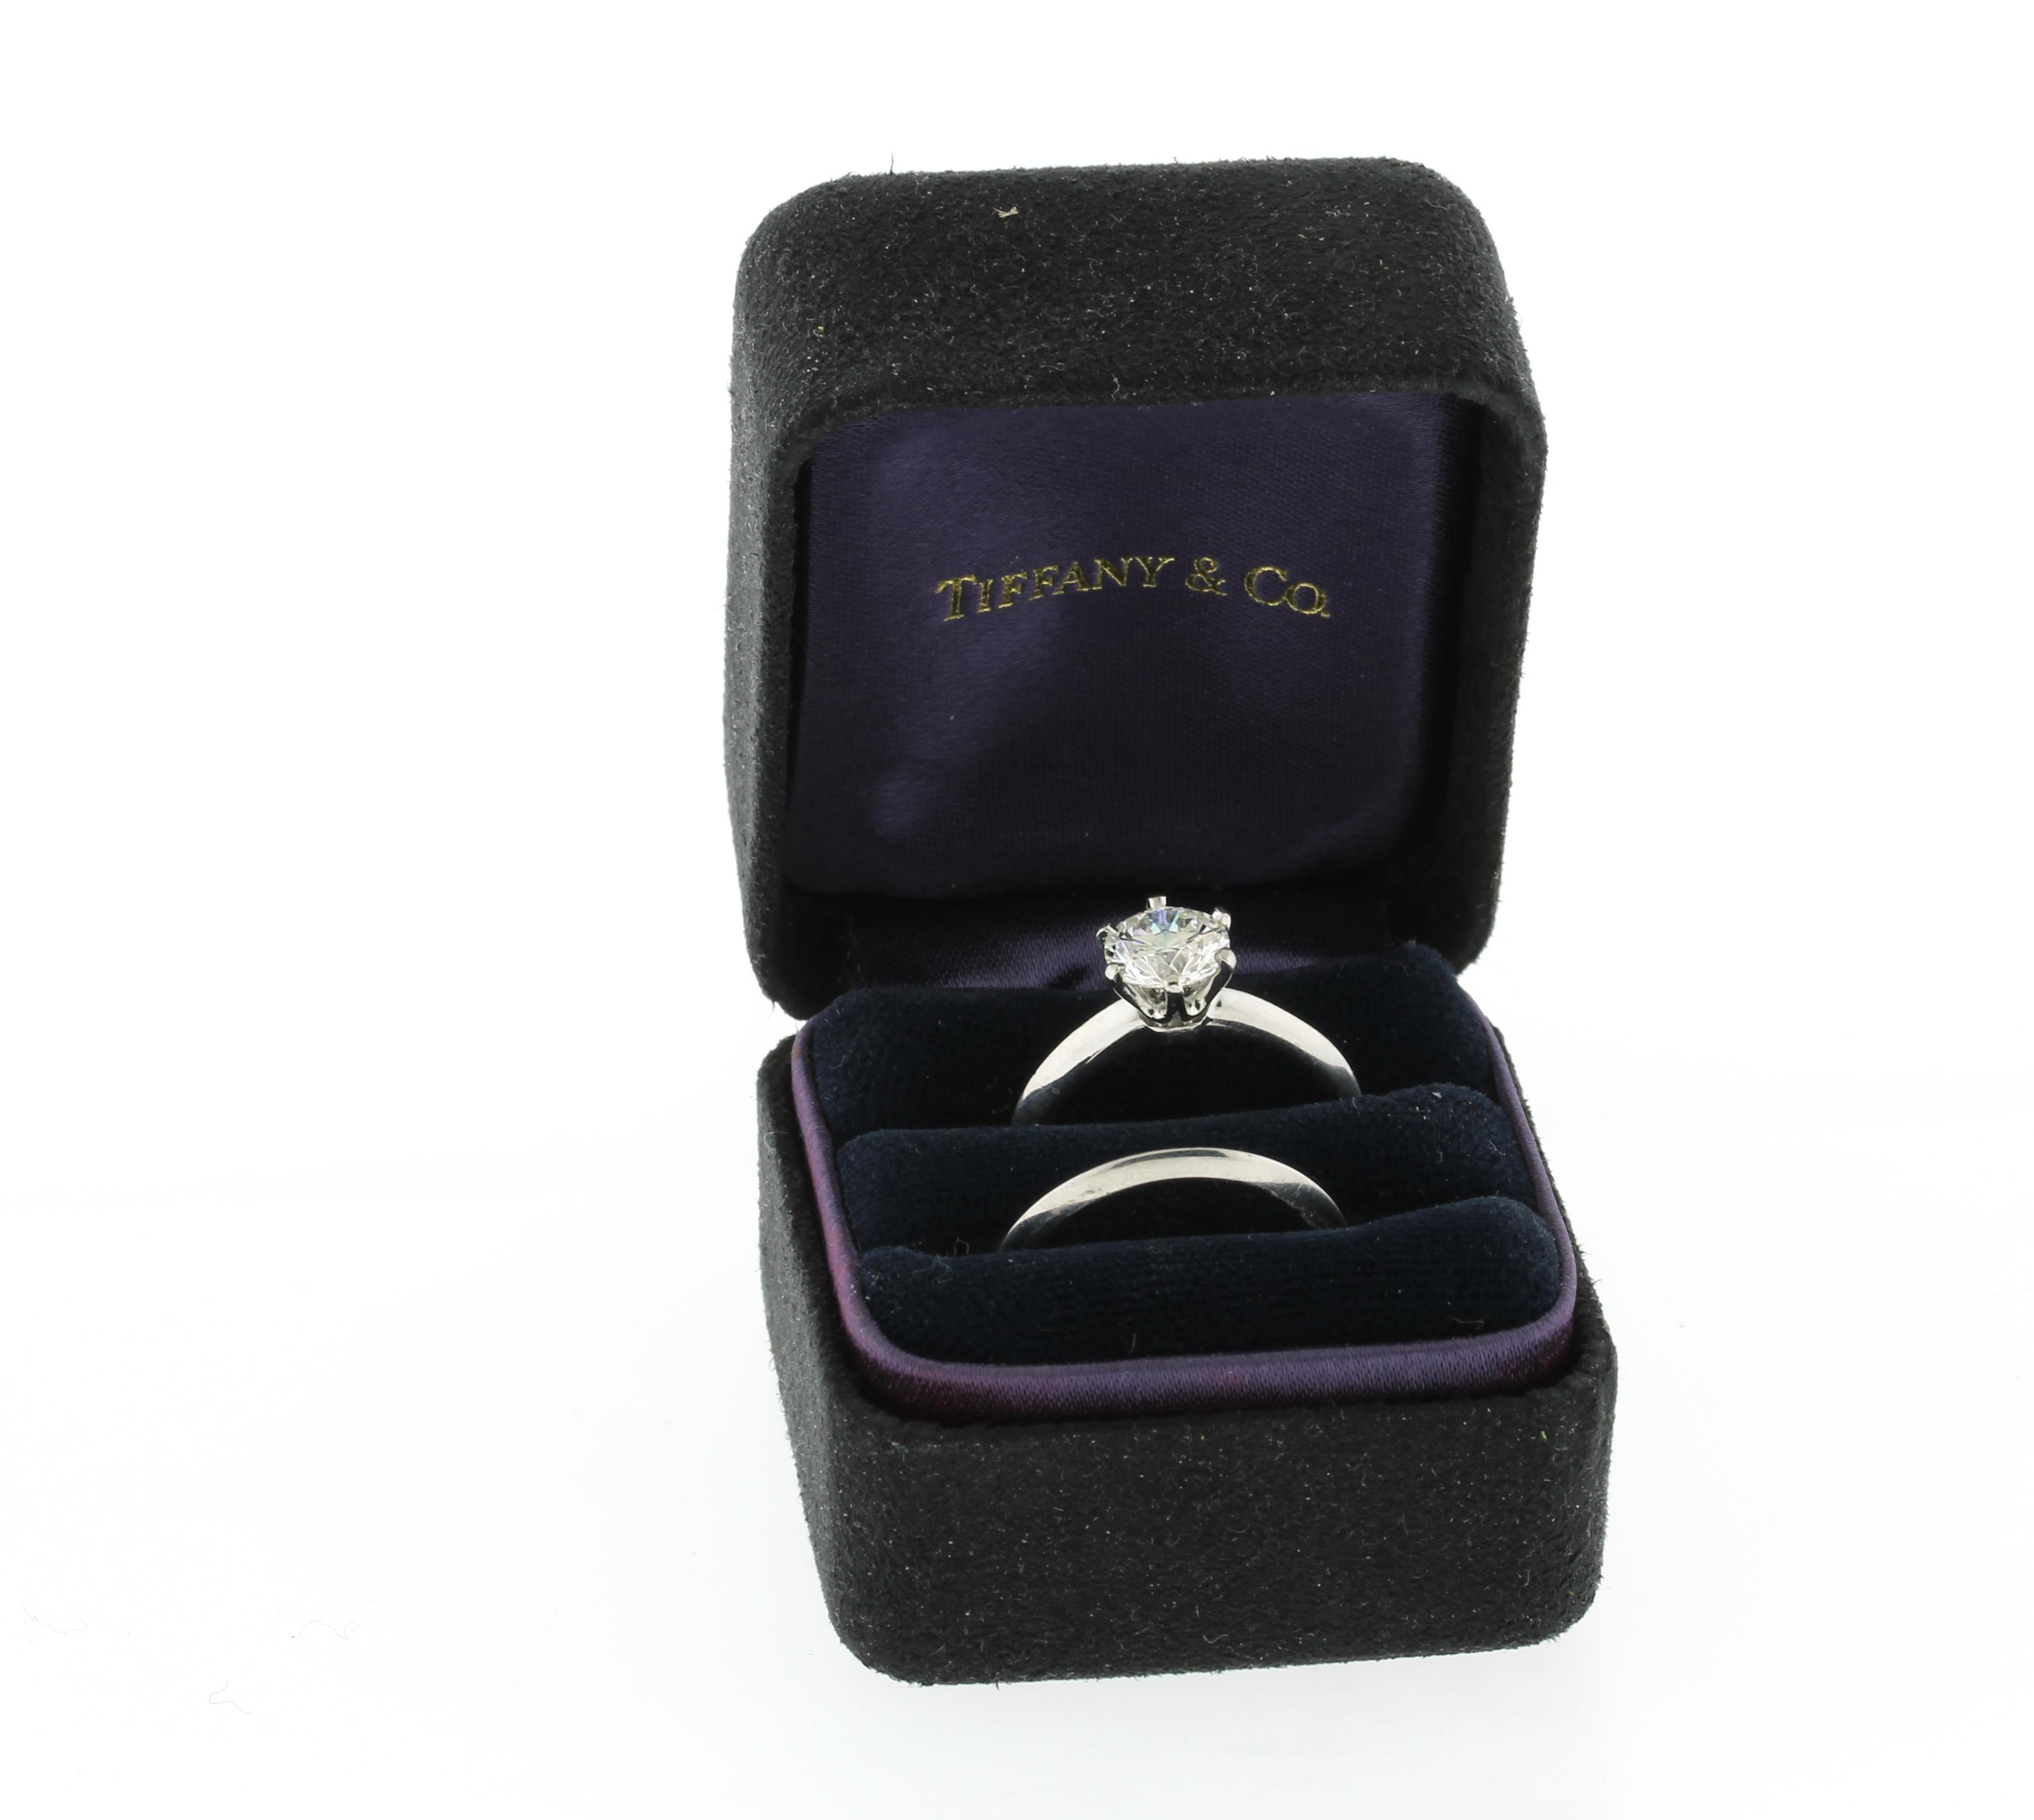 The ring features a center brilliant cut diamond weighing 1.34 carats. The diamond is I color and VS1 clarity.  All Tiffany & Co rings are pre-owned and sold with authentic Tiffany & Co  boxes.  Pampillonia is not affiliated with Tiffany & Co.  All